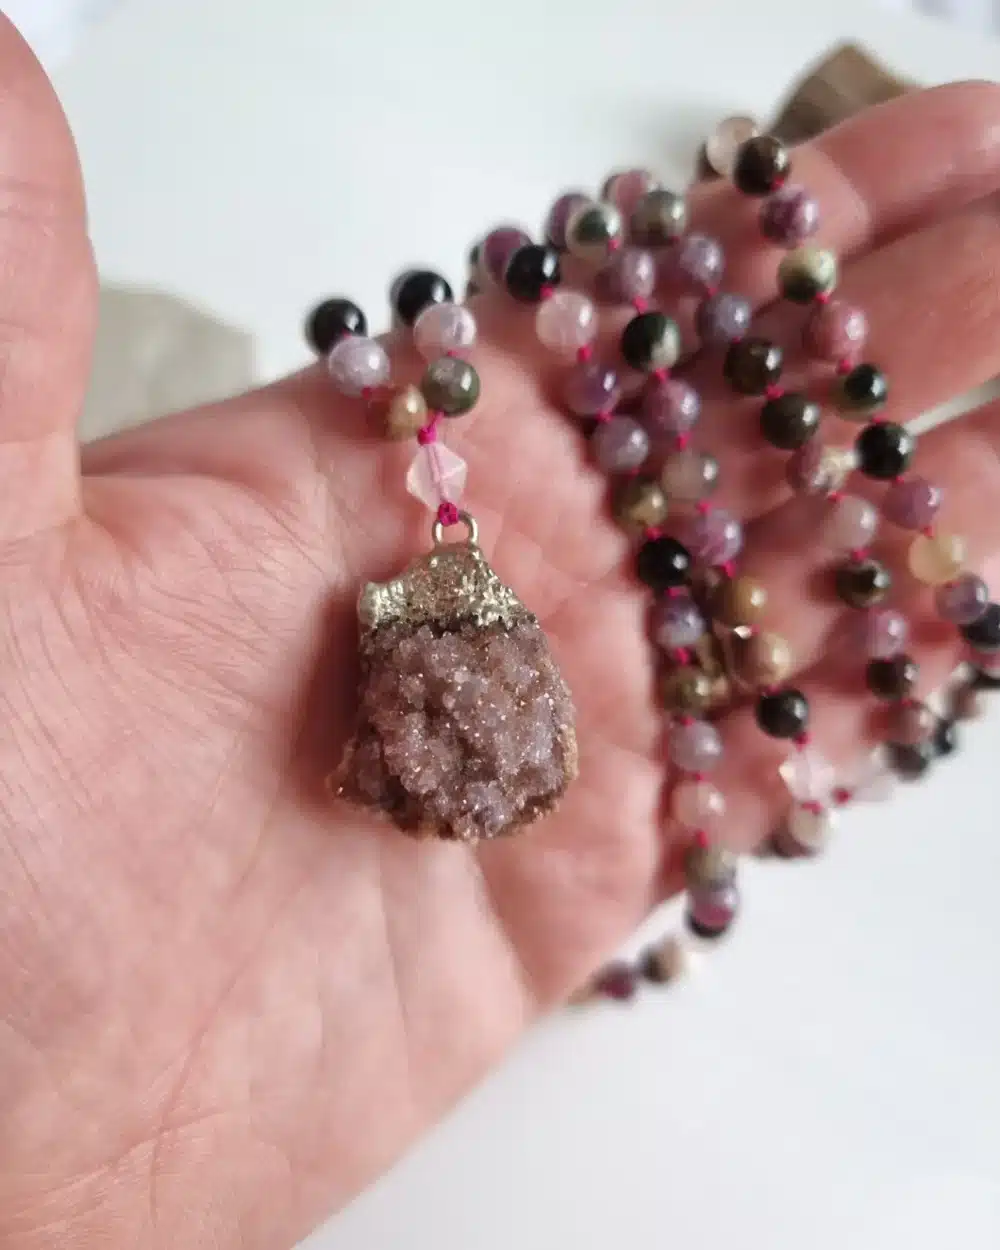 Spirit Quartz Pendant Necklace with Rose Quartz and Tourmaline with Pink thread. Necklace for Joy, Peace and Protection